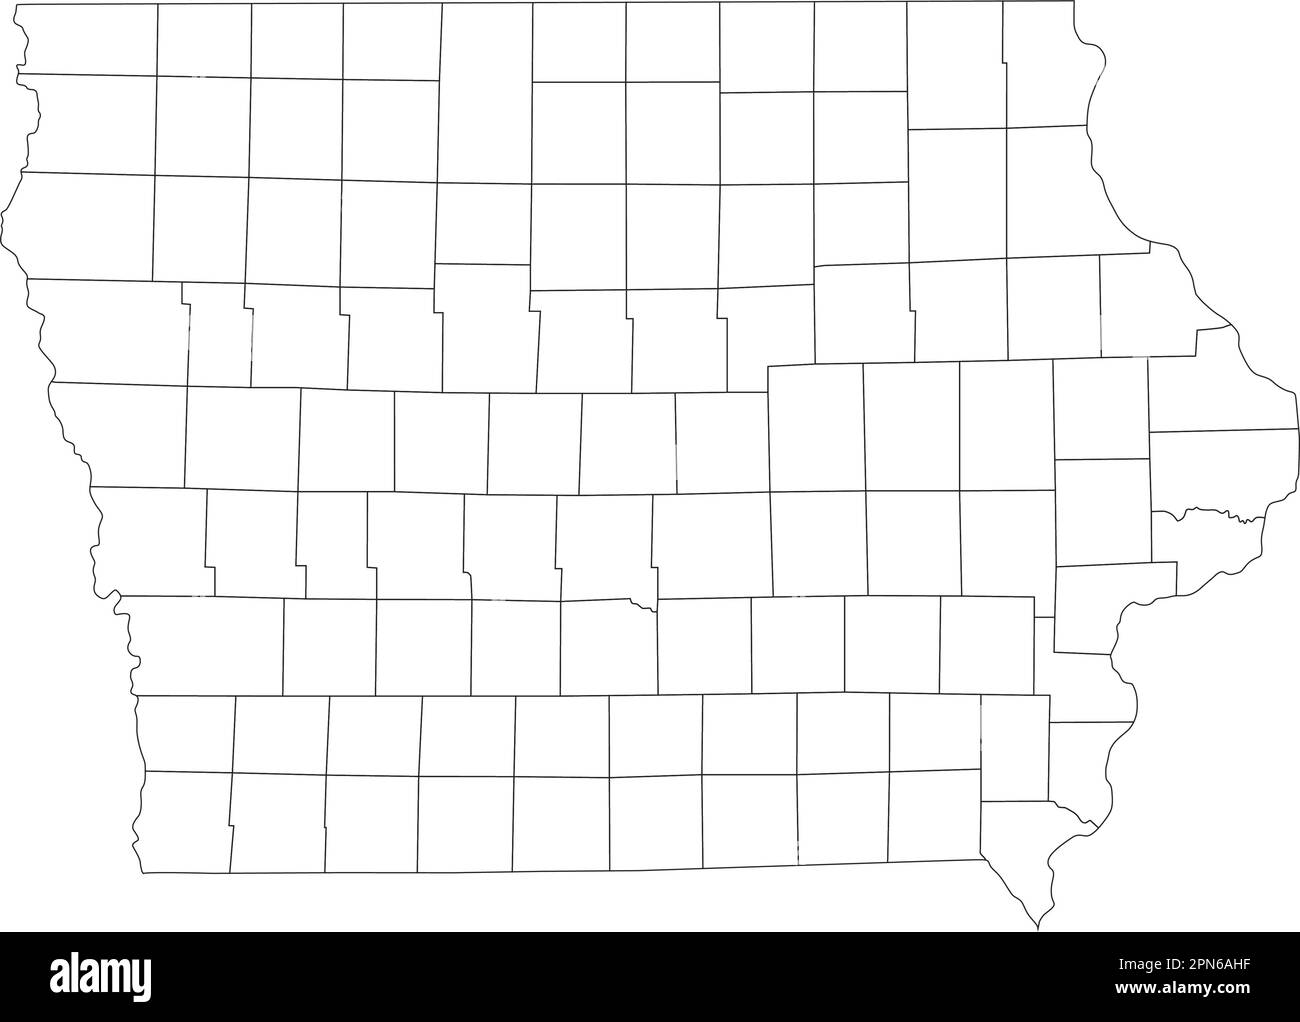 Highly Detailed Iowa Blind Map. Stock Vector